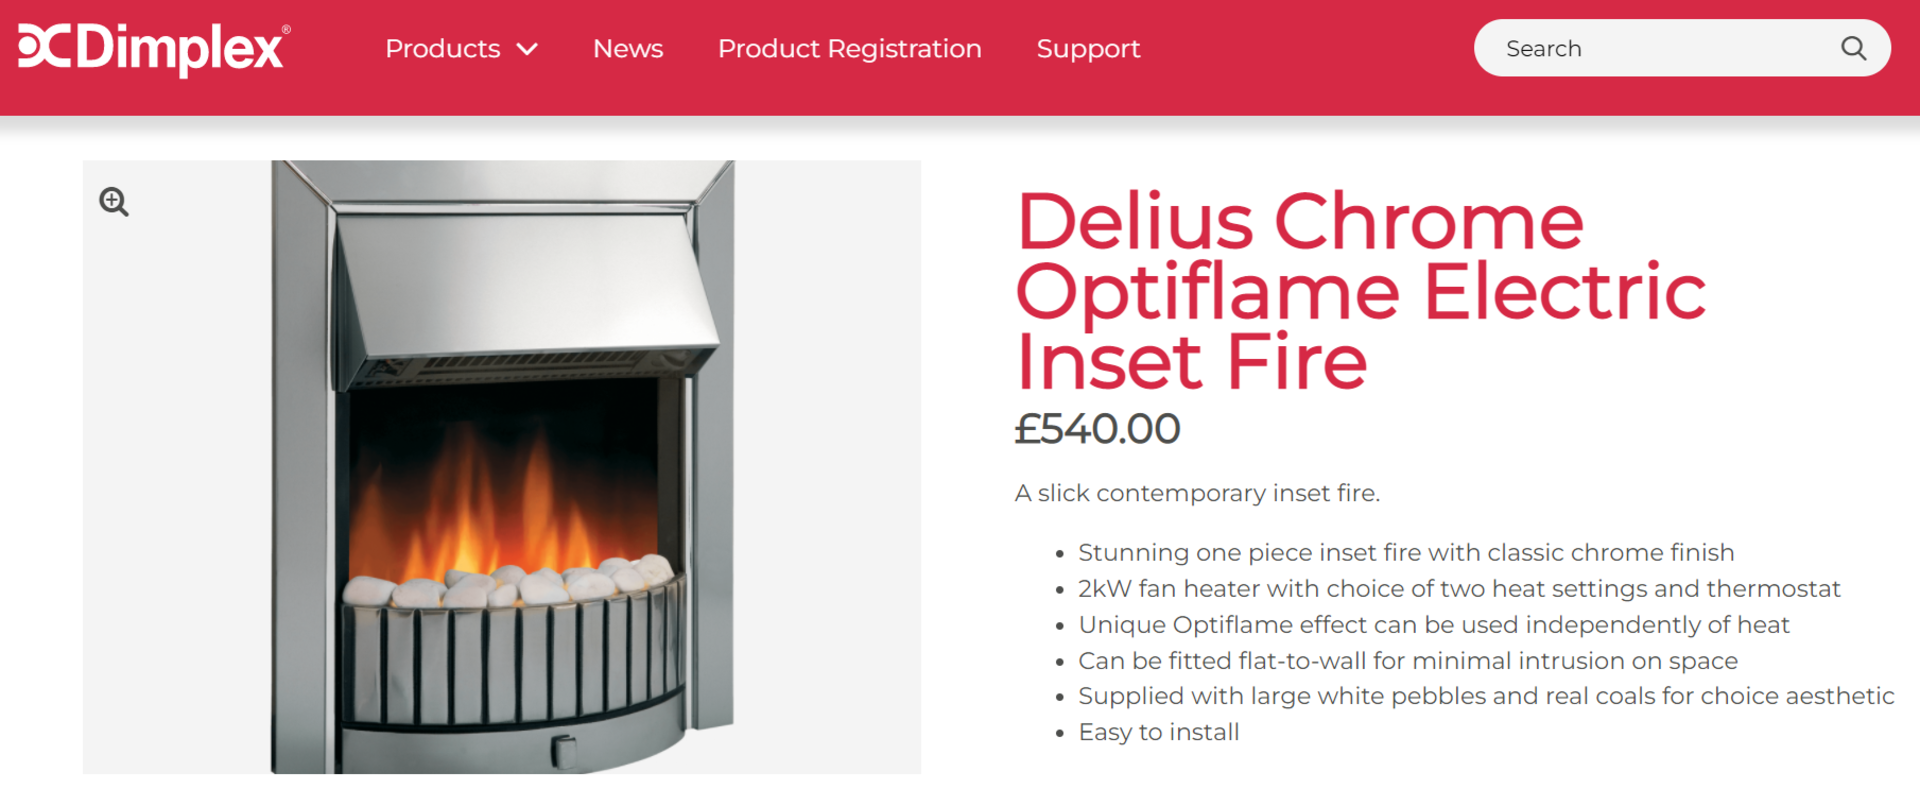 1 X BRAND NEW BOXED Delius Chrome Optiflame Electric Inset Fire RRP £540.00. A slick contemporary